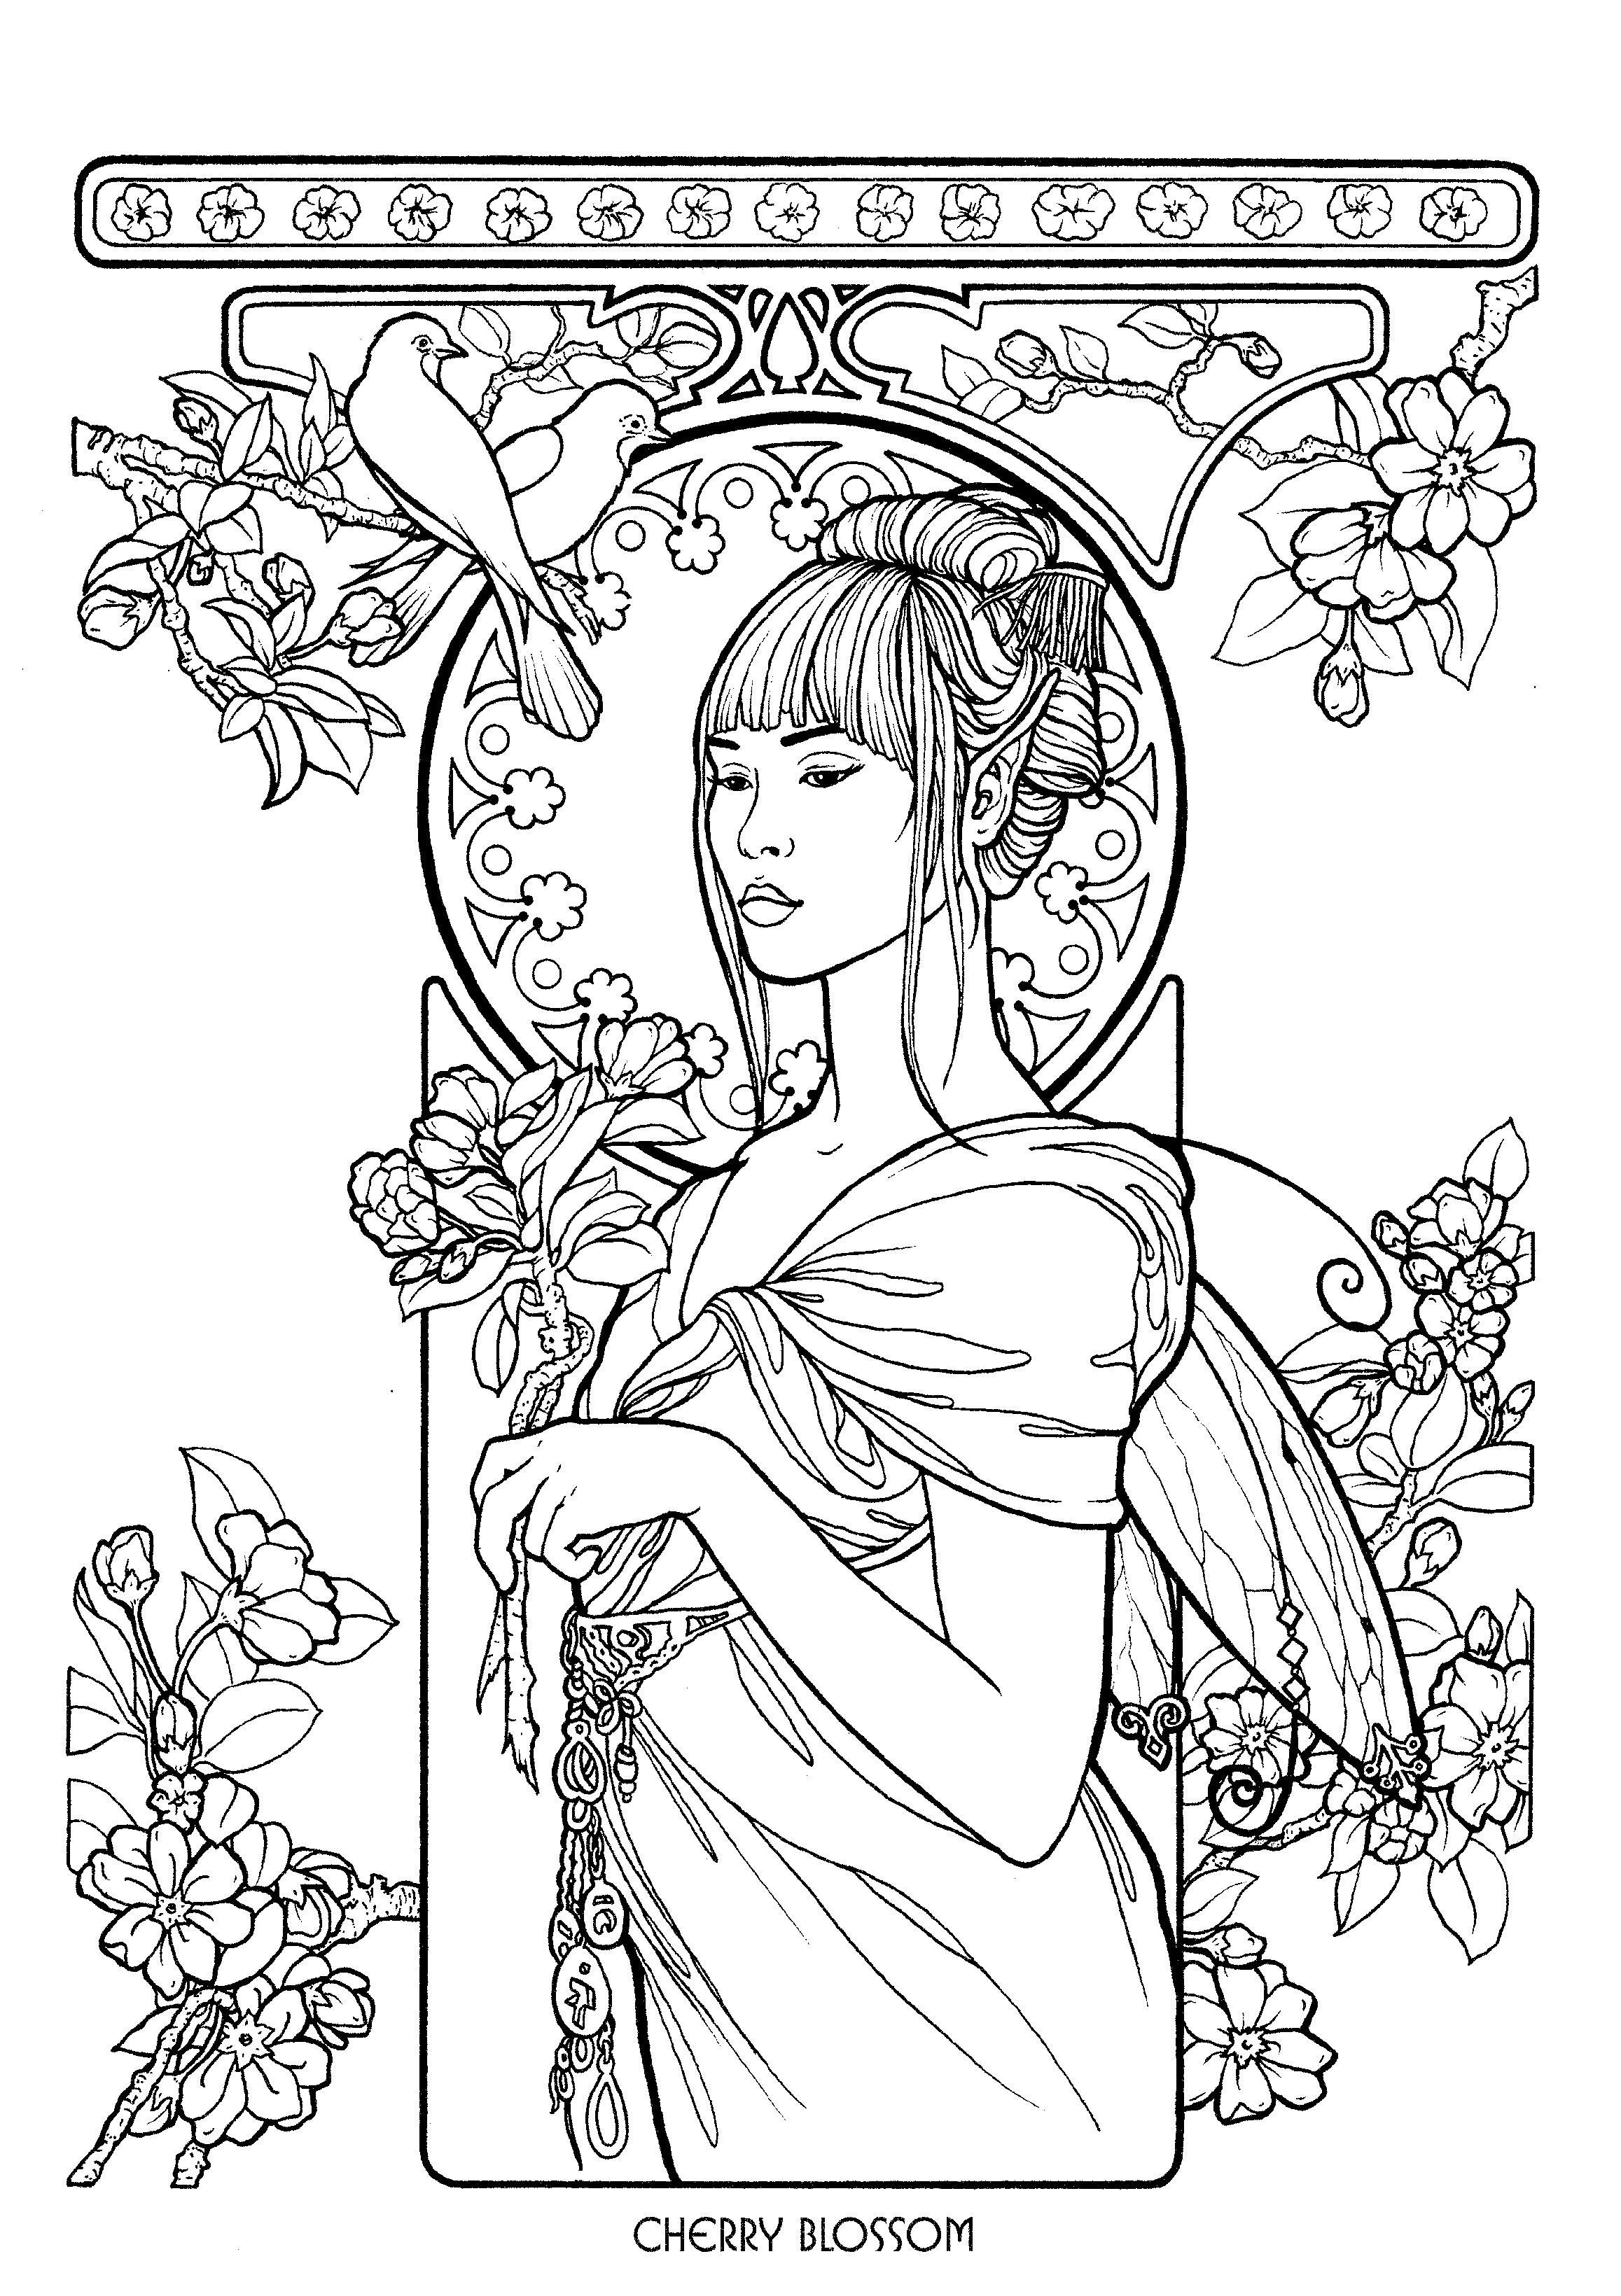 Coloring Pages Adults Girl
 Pin by Brenda Mendenhall on Art I Like